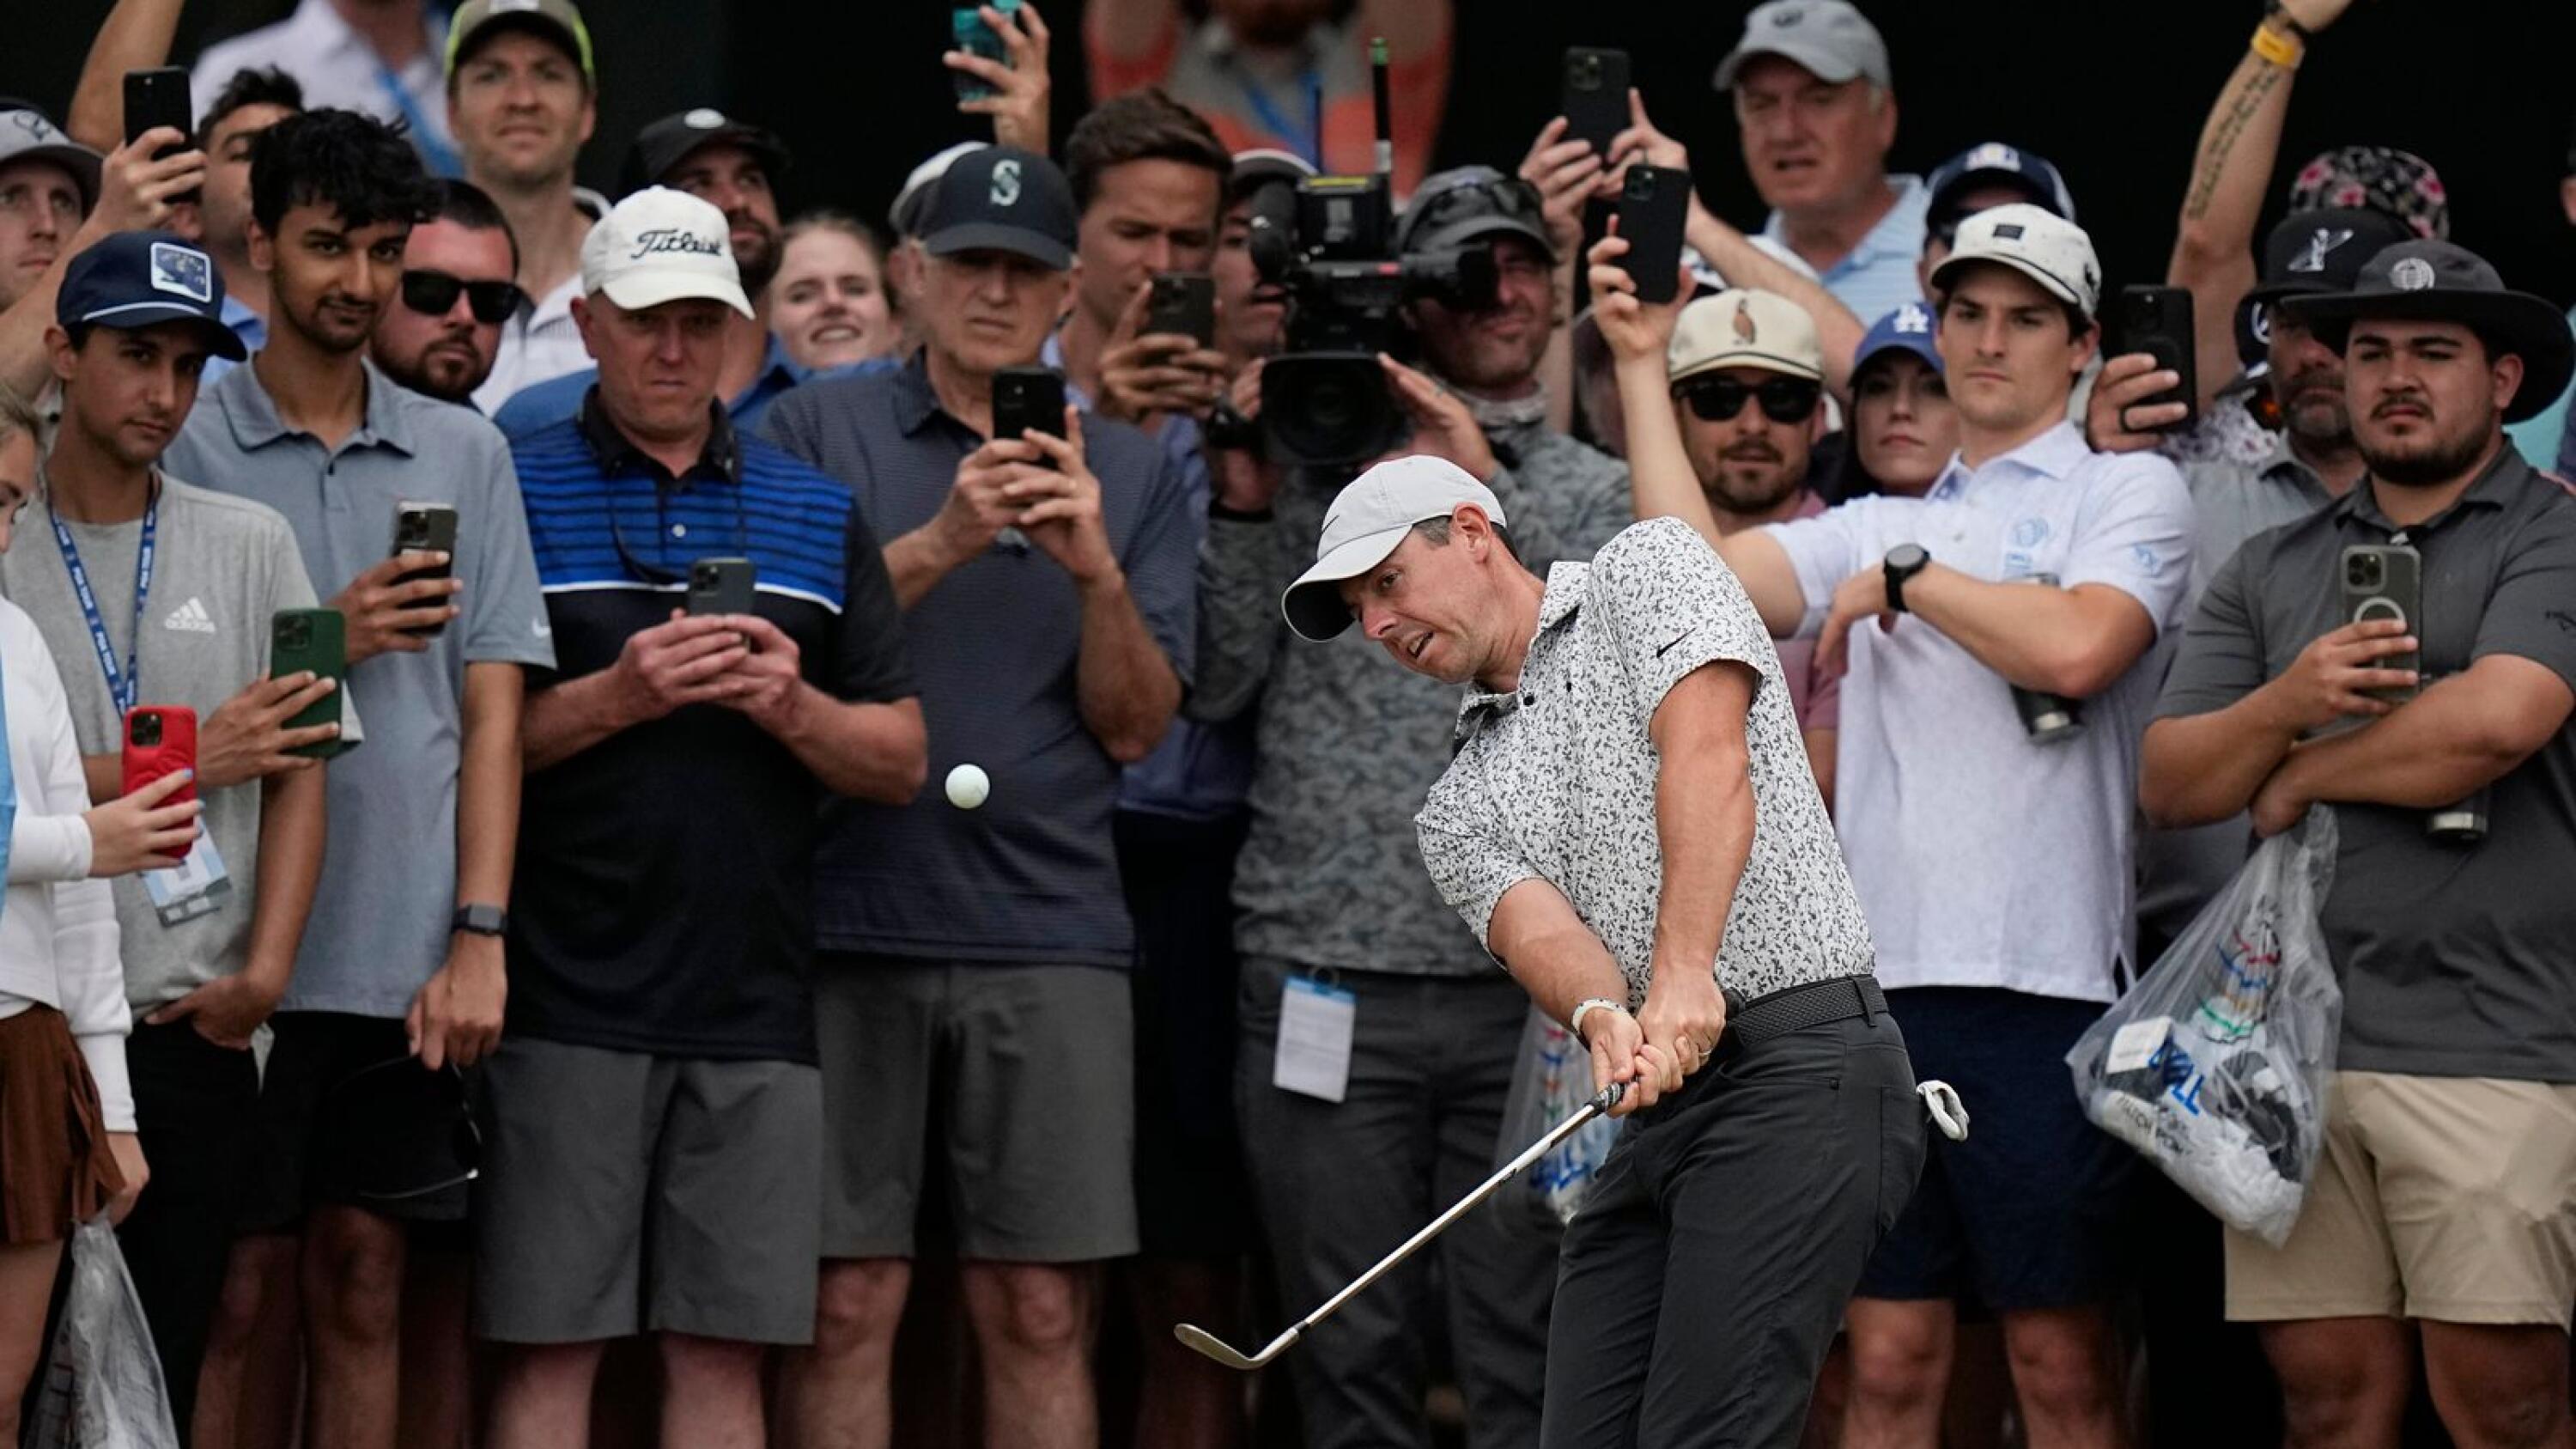 McIlroy powers his way to another win in Match Play